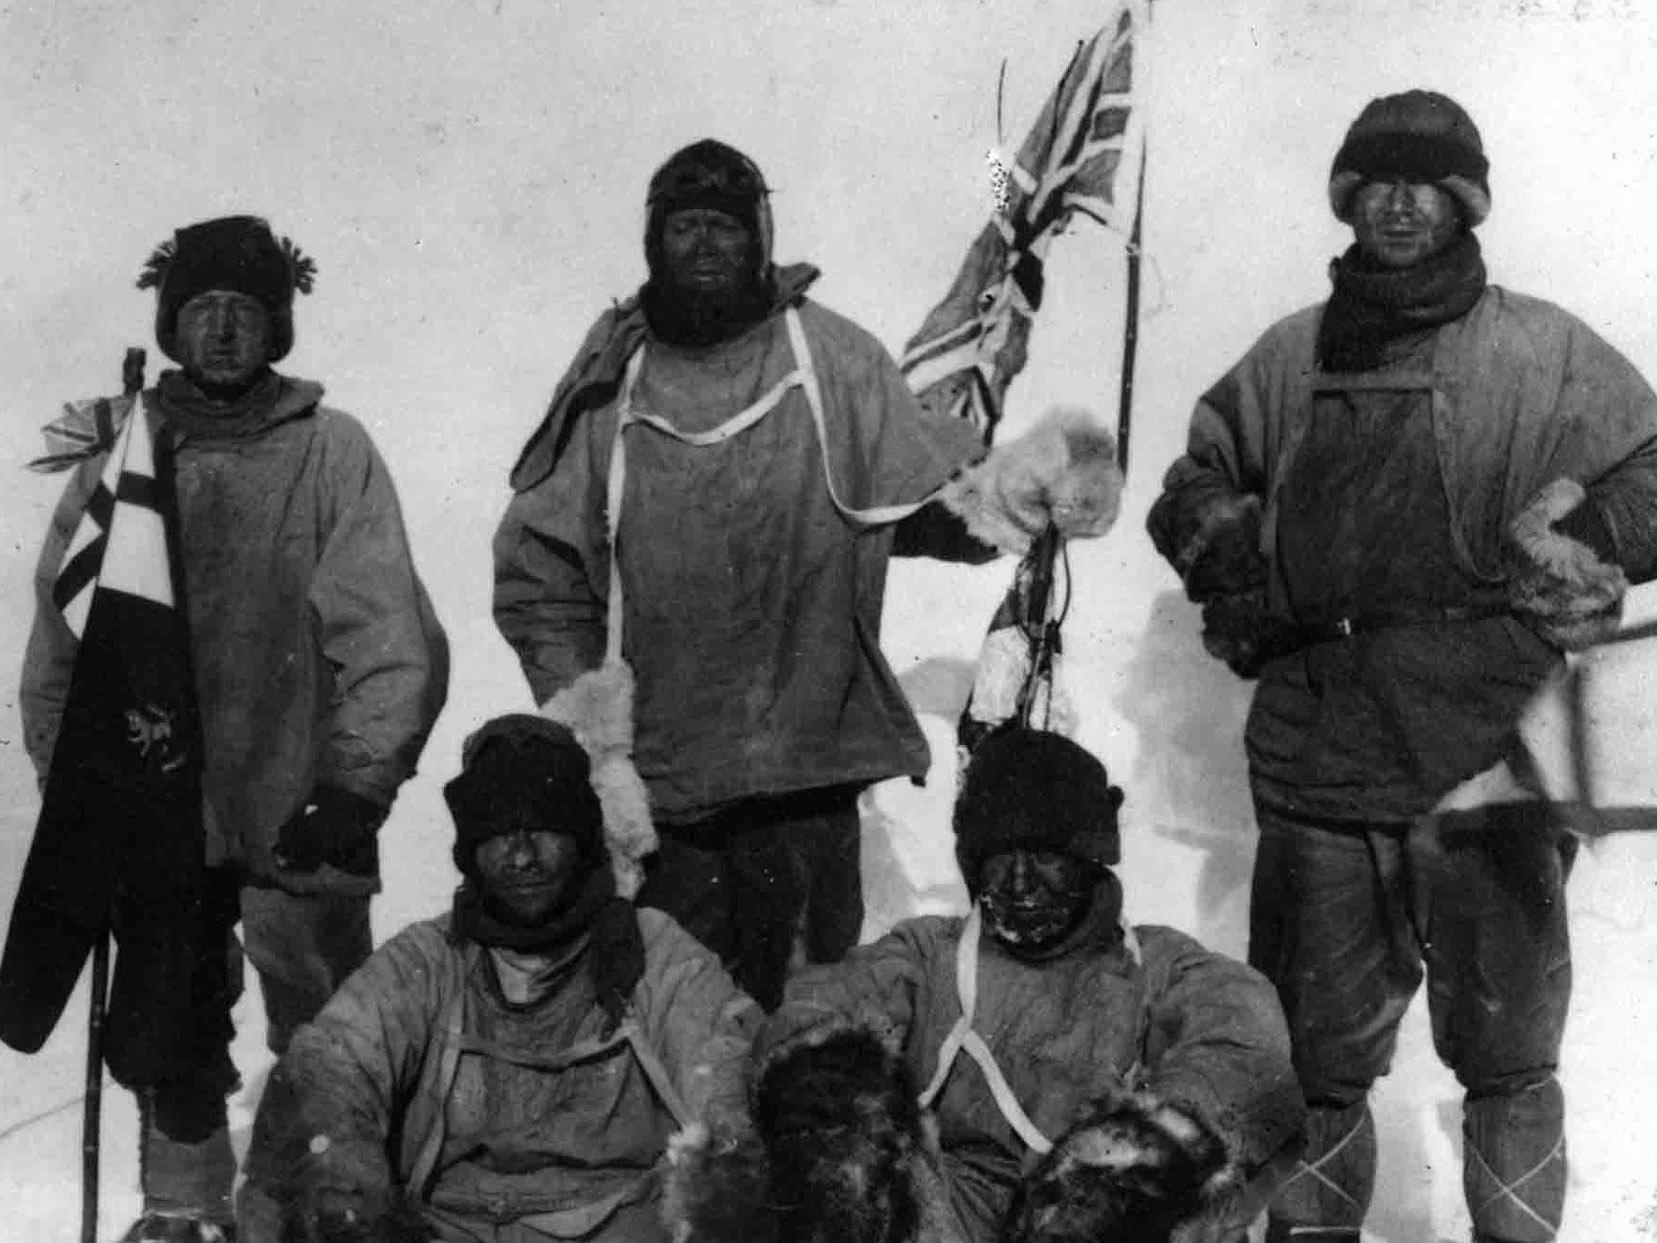 Explorer Captain Robert Scott and his four-man team arrived at the South Pole only to find a crew of Norwegian explorers had reached there 34 days earlier